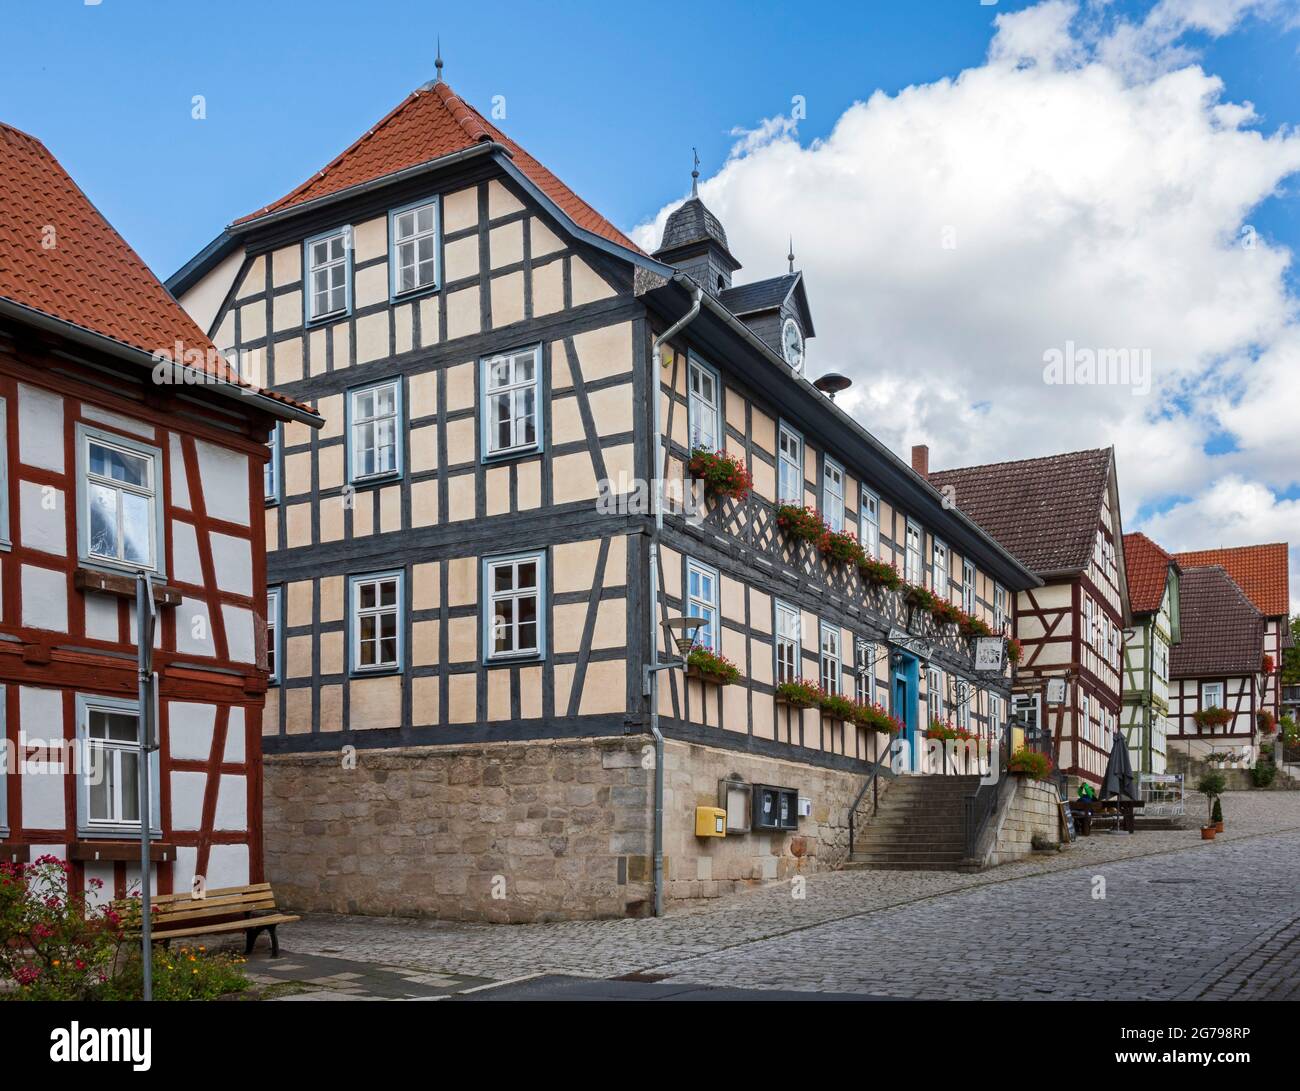 Ummerstadt is (2019) the smallest town in Thuringia. The historic old town of Ummerstadt, in which there are many half-timbered houses, is a listed building. The market square with the historic town hall, which is now used as a restaurant, is particularly worth seeing. Stock Photo